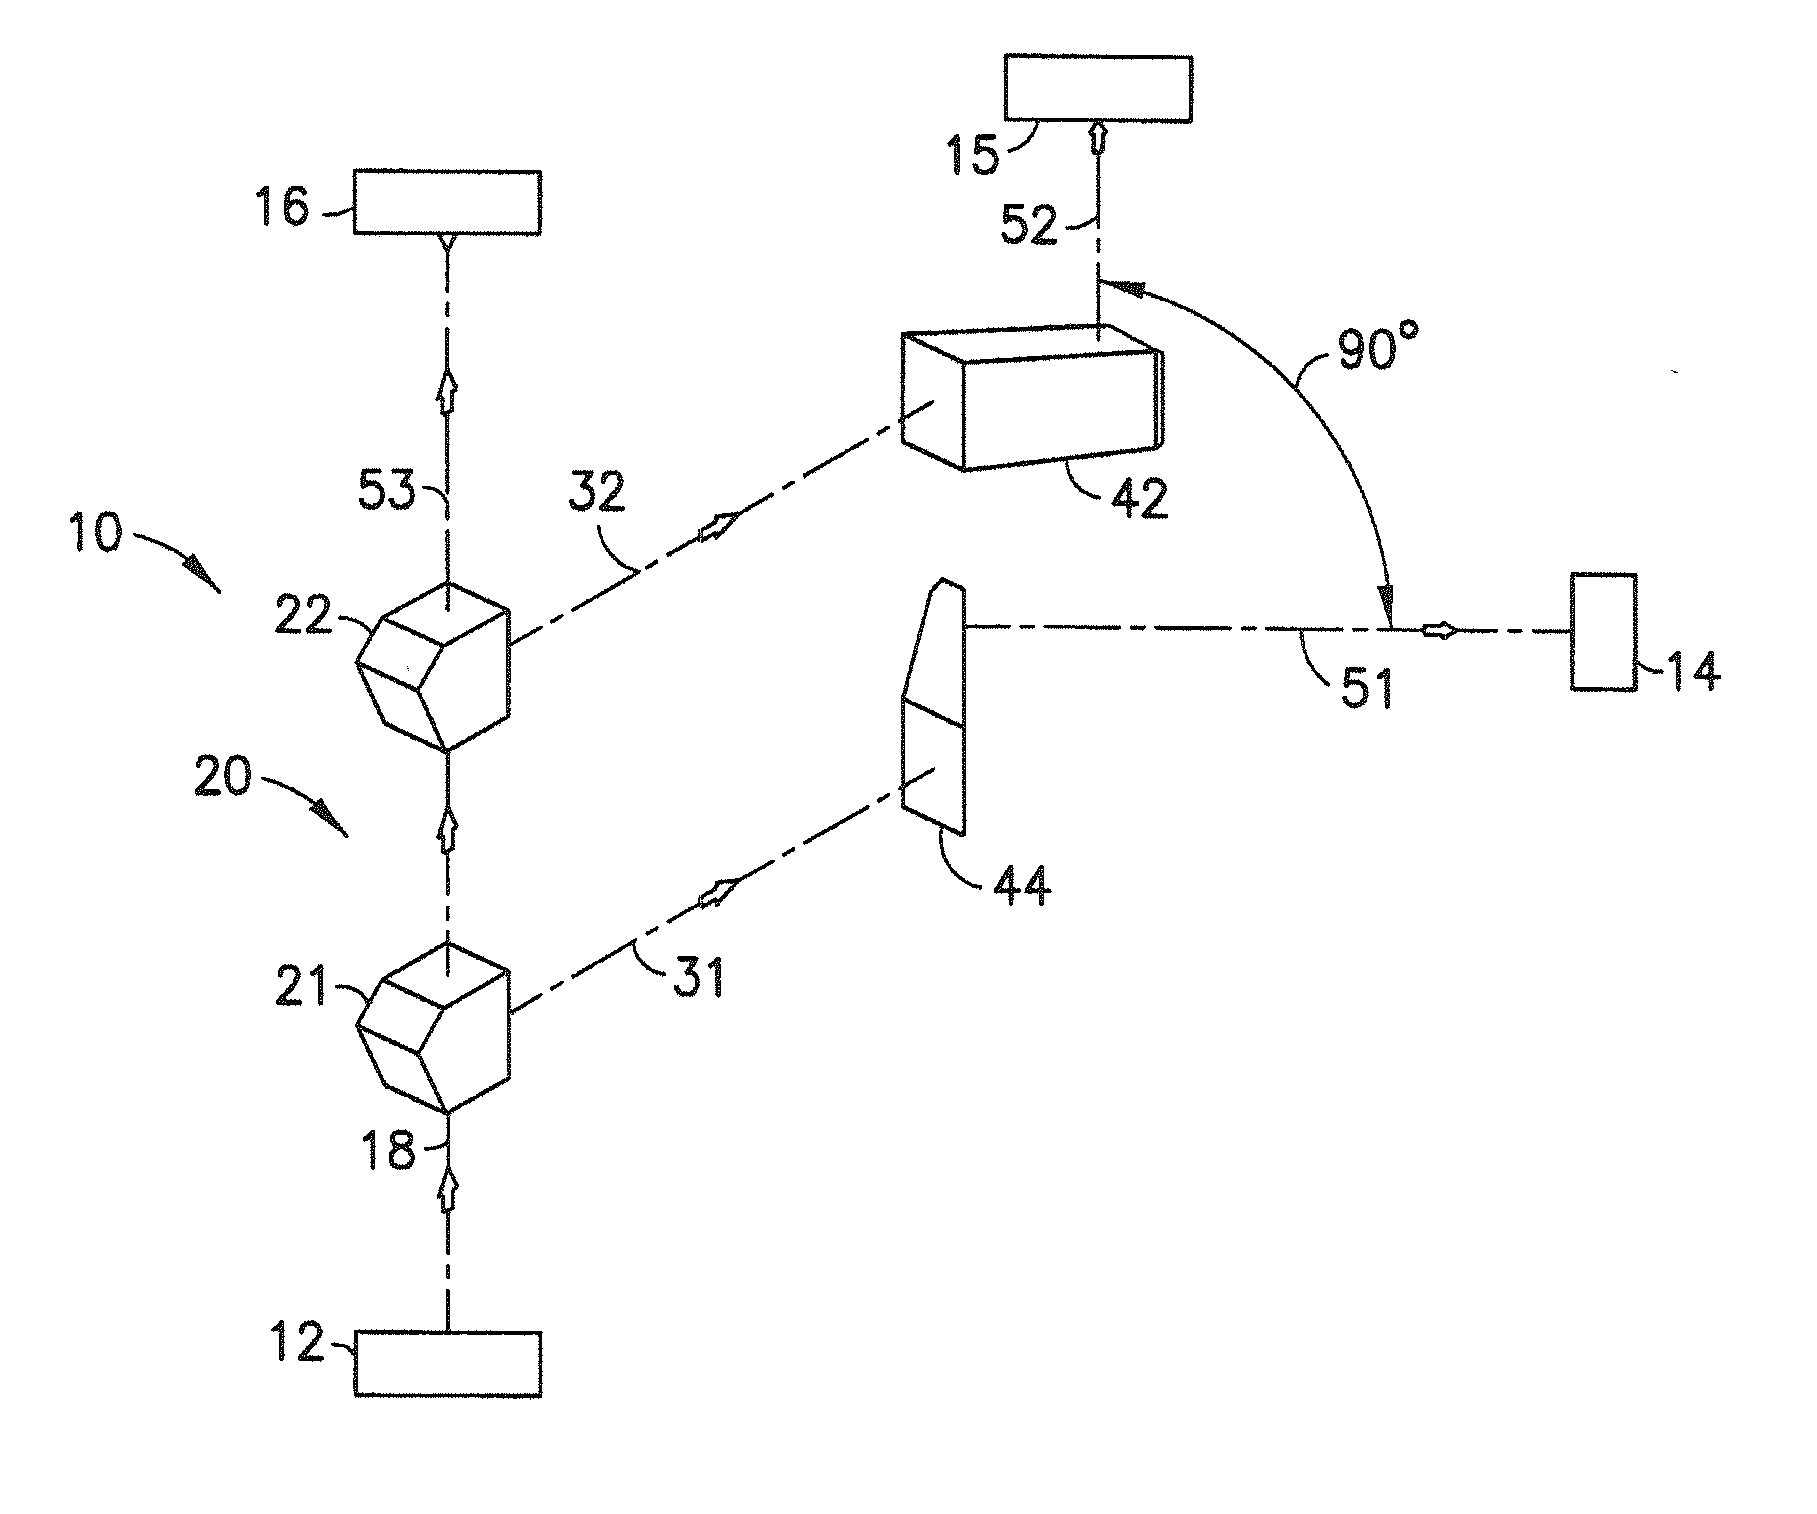 Optical assembly and laser alignment apparatus